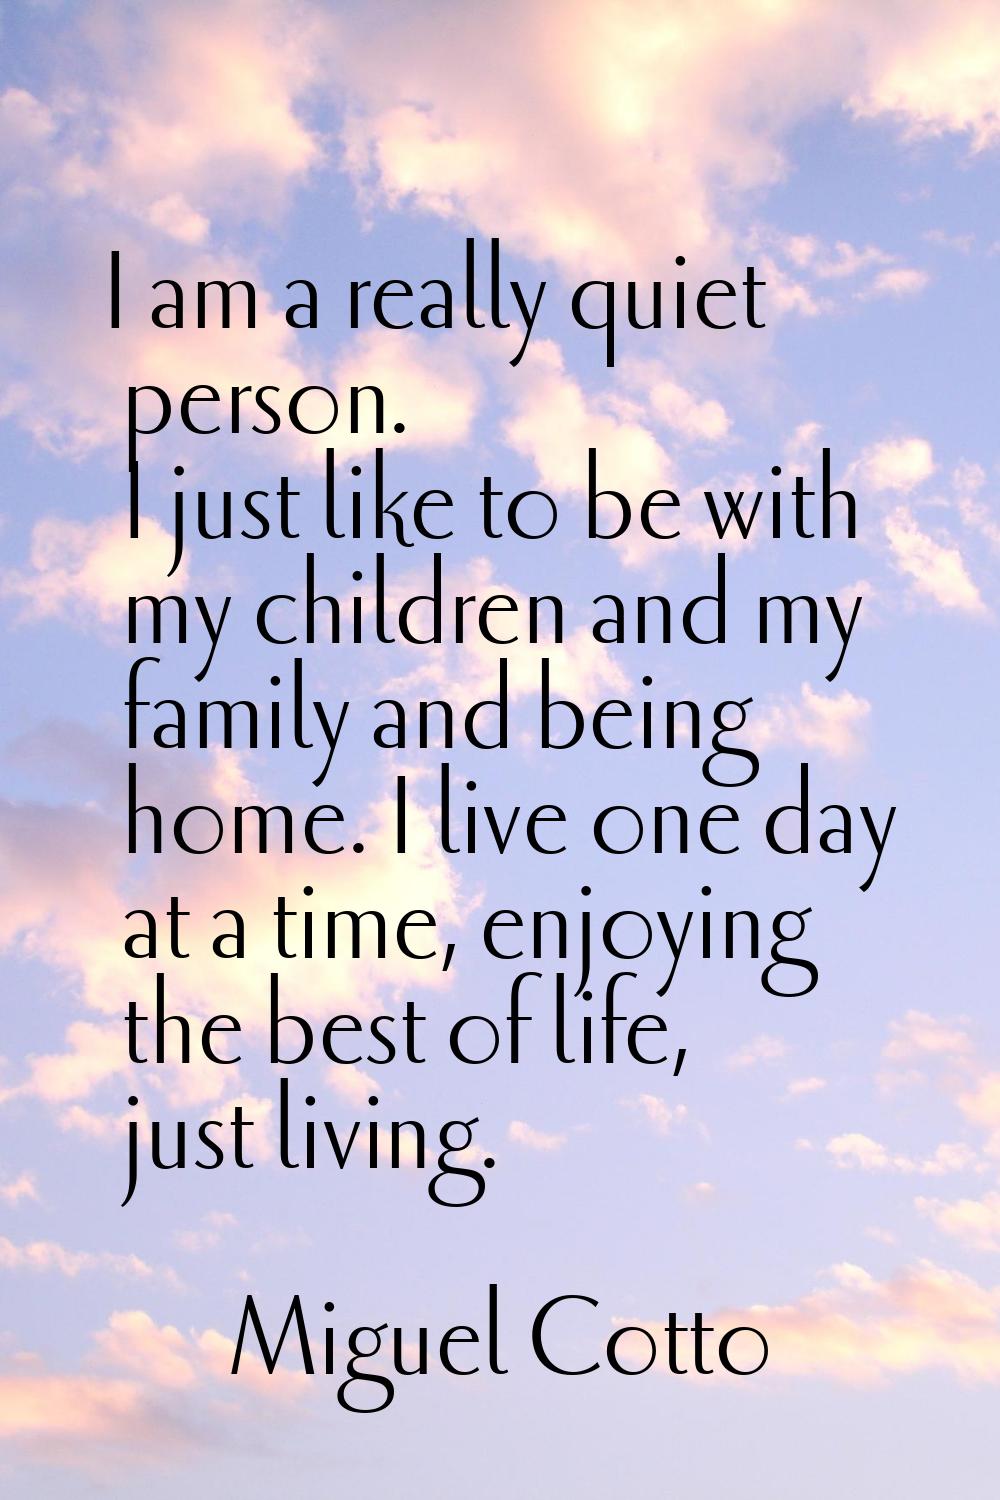 I am a really quiet person. I just like to be with my children and my family and being home. I live